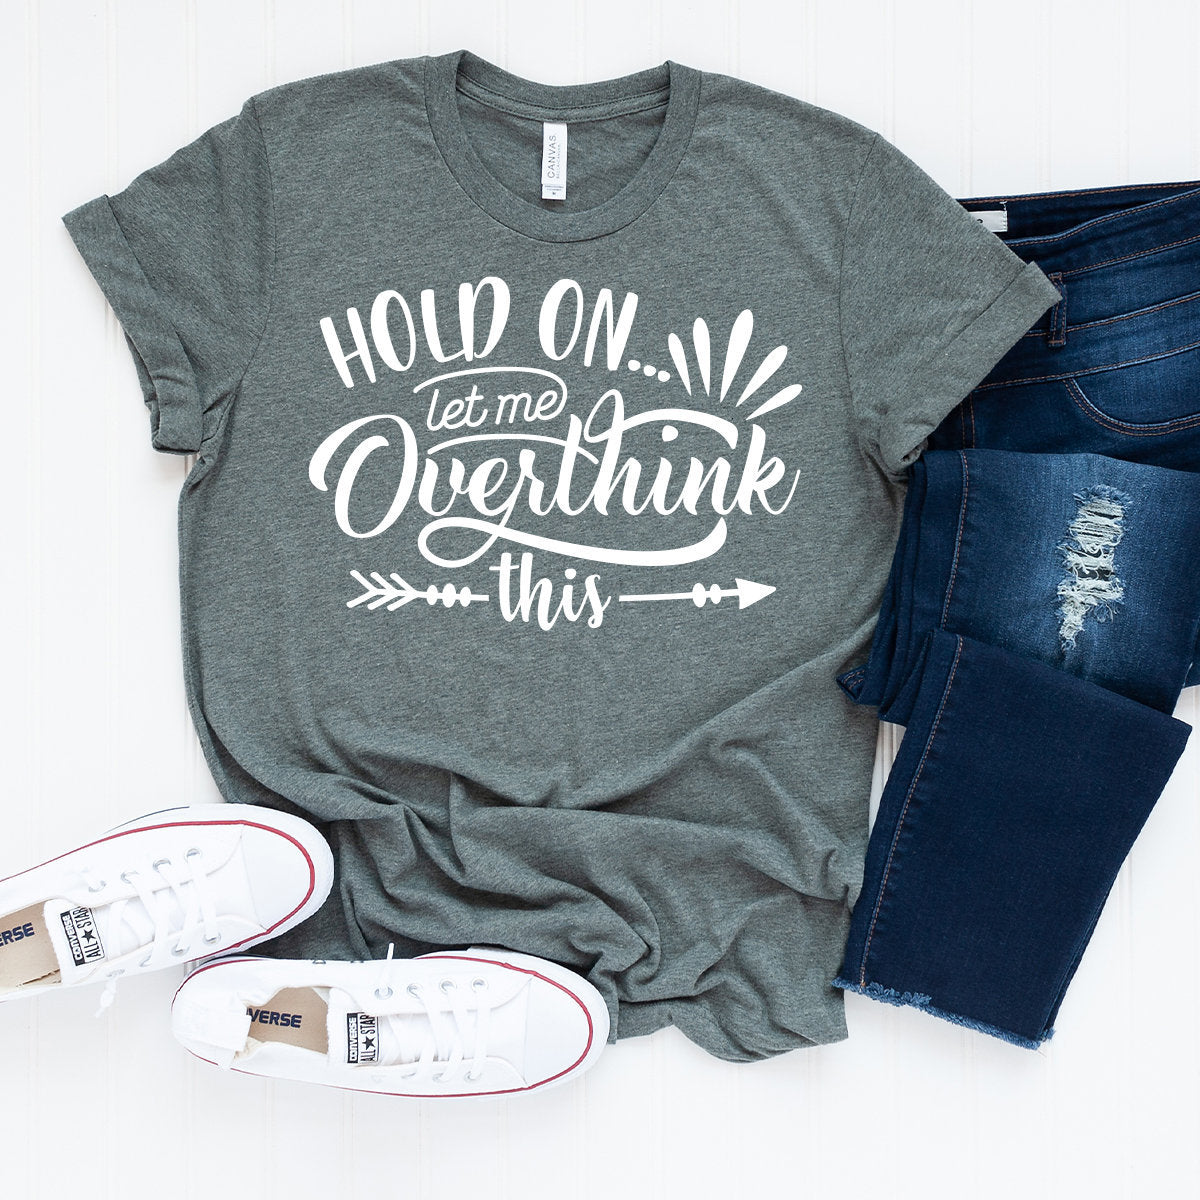 Funny Saying T Shirt, Hold On Let Me Overthink This Shirt, Sarcastic Shirt, Funny Shirt, Offensive Shirt, Funny Mom Shirt, Moms Life  Shirt - Fastdeliverytees.com